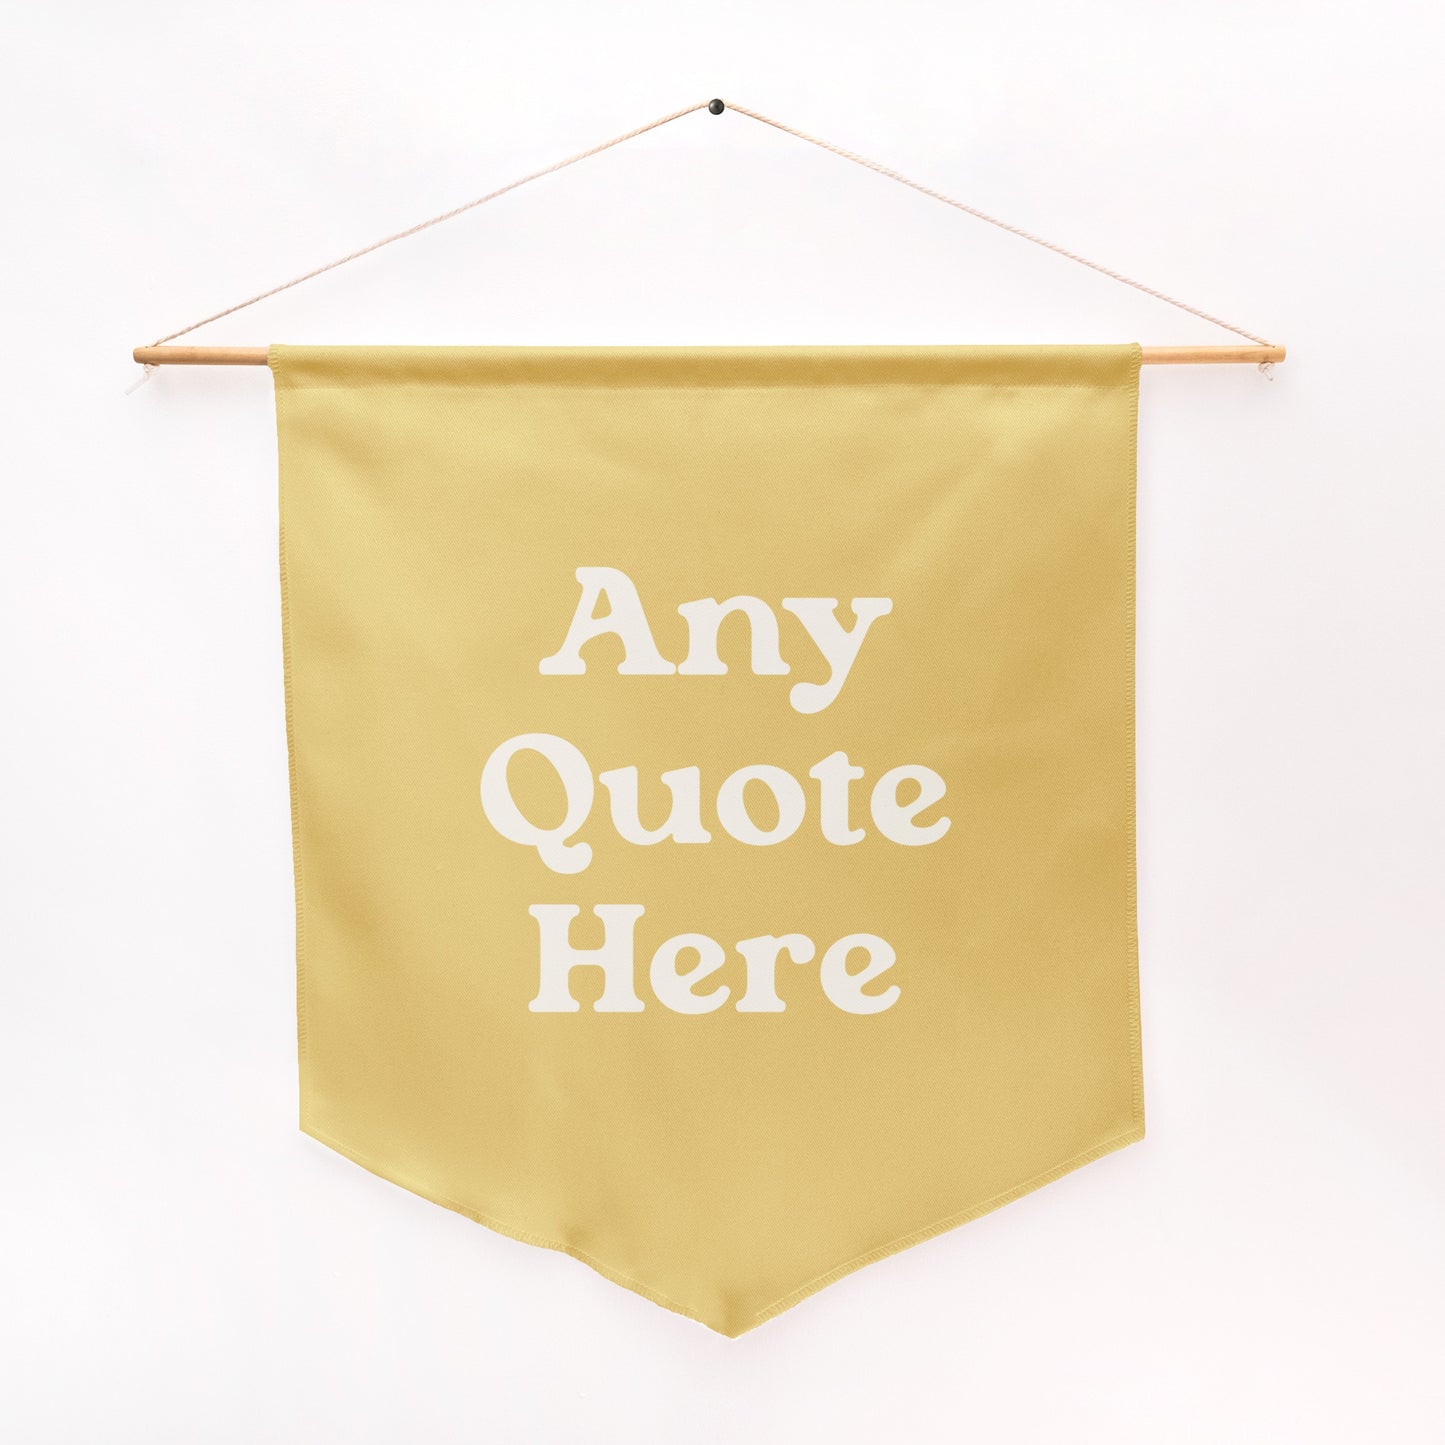 Custom Quote Banner in Retro Style Font